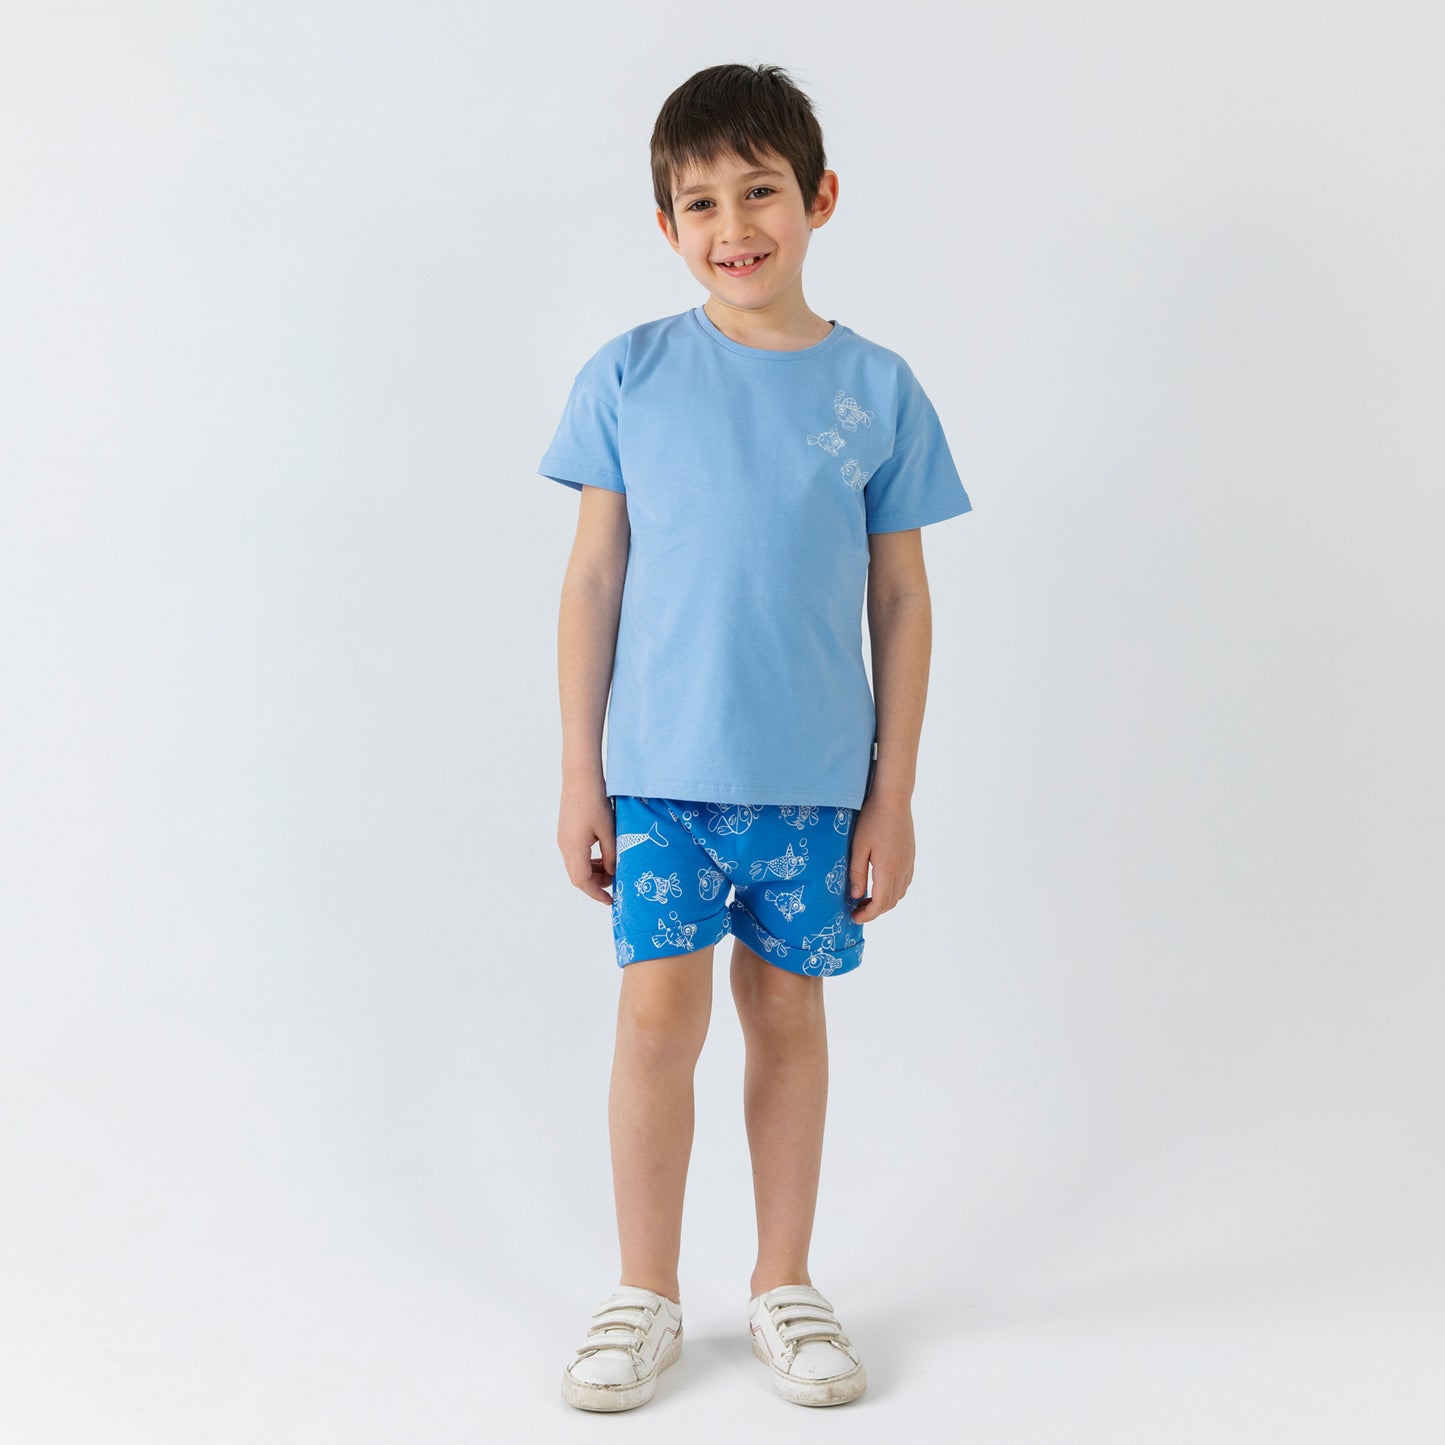 Baggy Shorts - Aged 6m to 7 Yrs- Colored  Blue